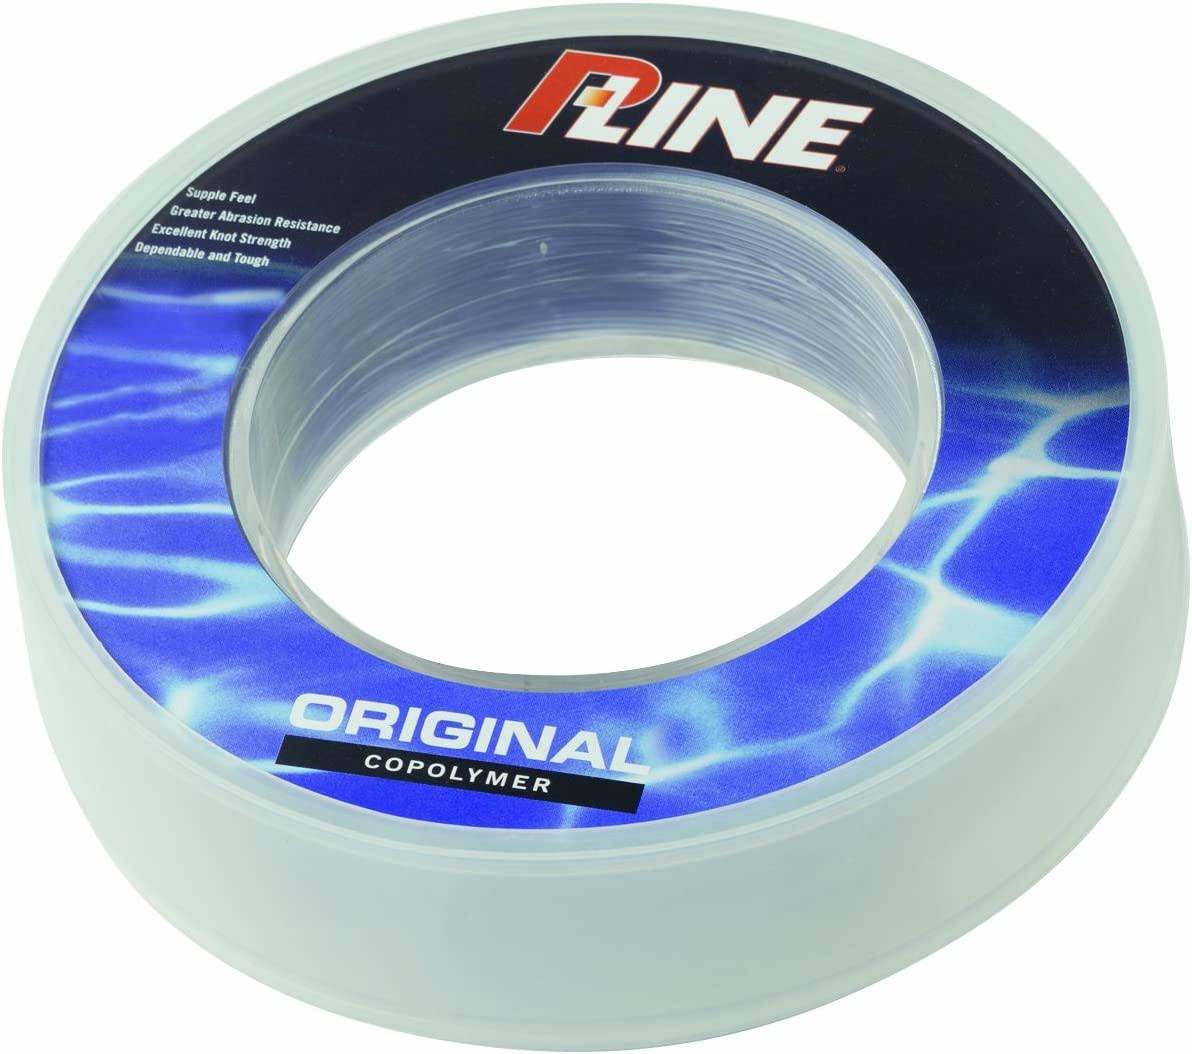 P-Line 100 Yard Leader, 70kg | Boating & Fishing | 30 Day Money Back Guarantee | Best Price Guarantee | Free Shipping On All Orders